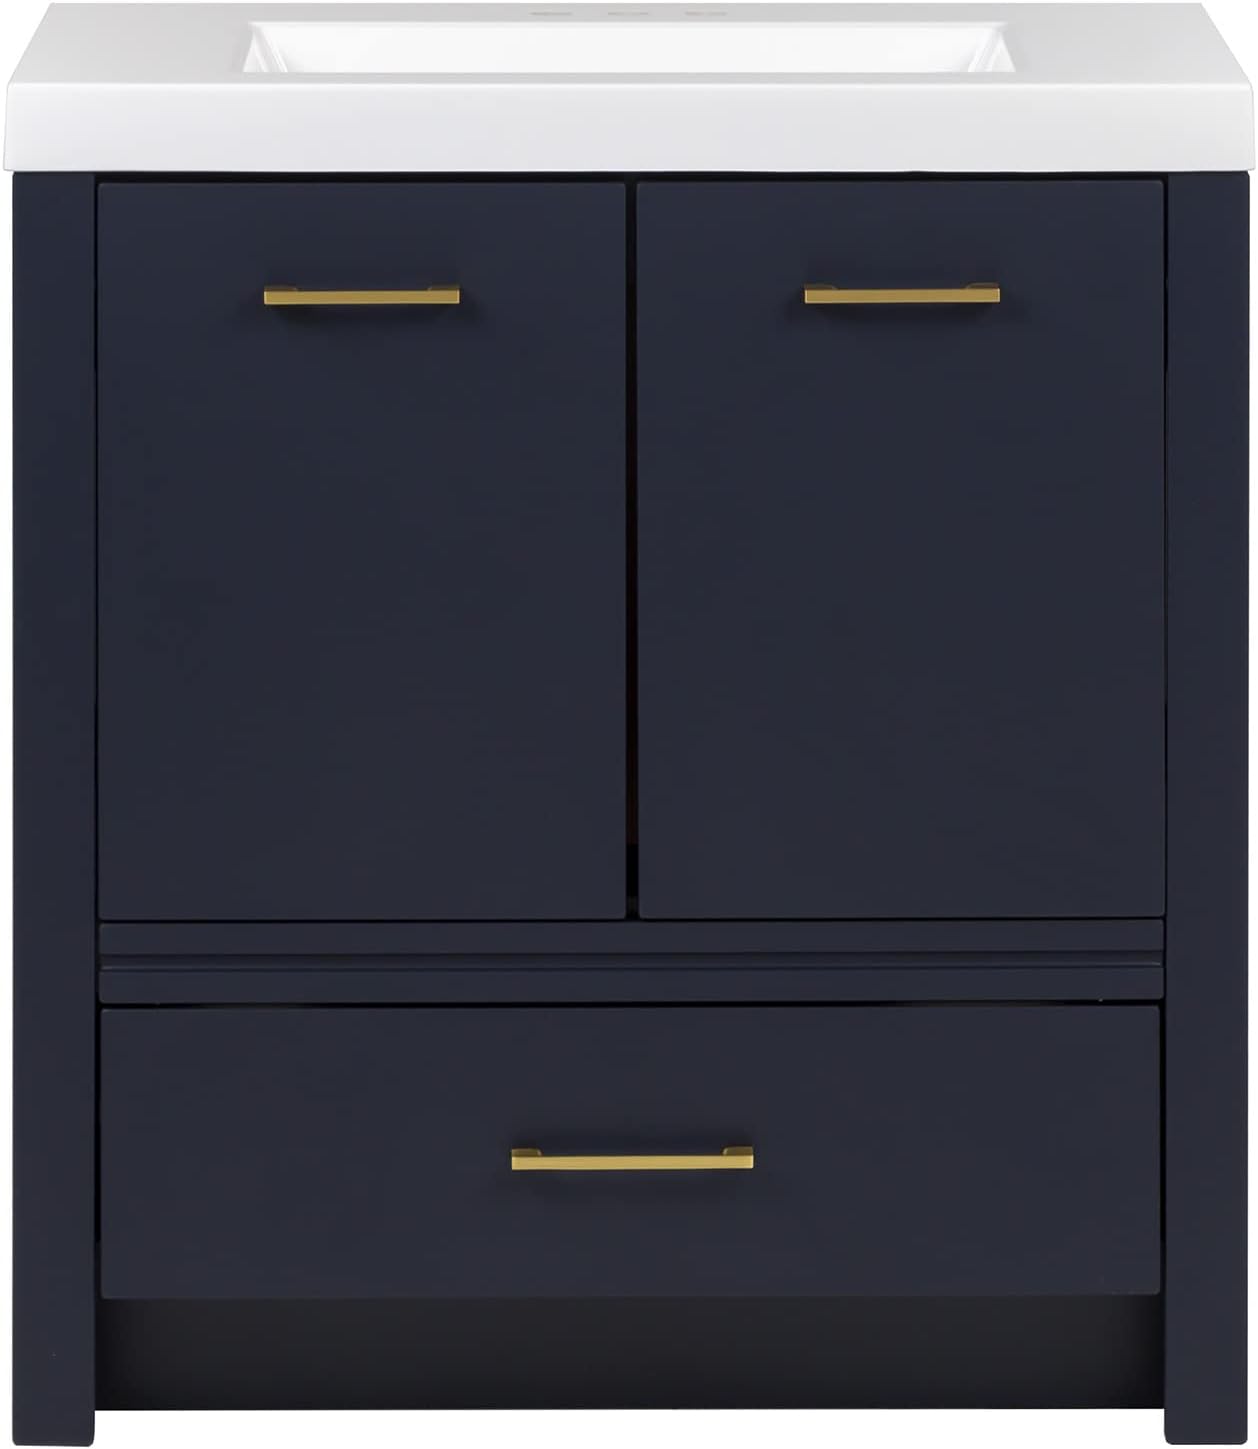 Spring Mill Cabinets Hali Bathroom Vanity with 2-Door Cabinet, Base Drawer, and White Single-Sink Top, 30.5 W x 18.75 D x 34.14 H, Deep Blue